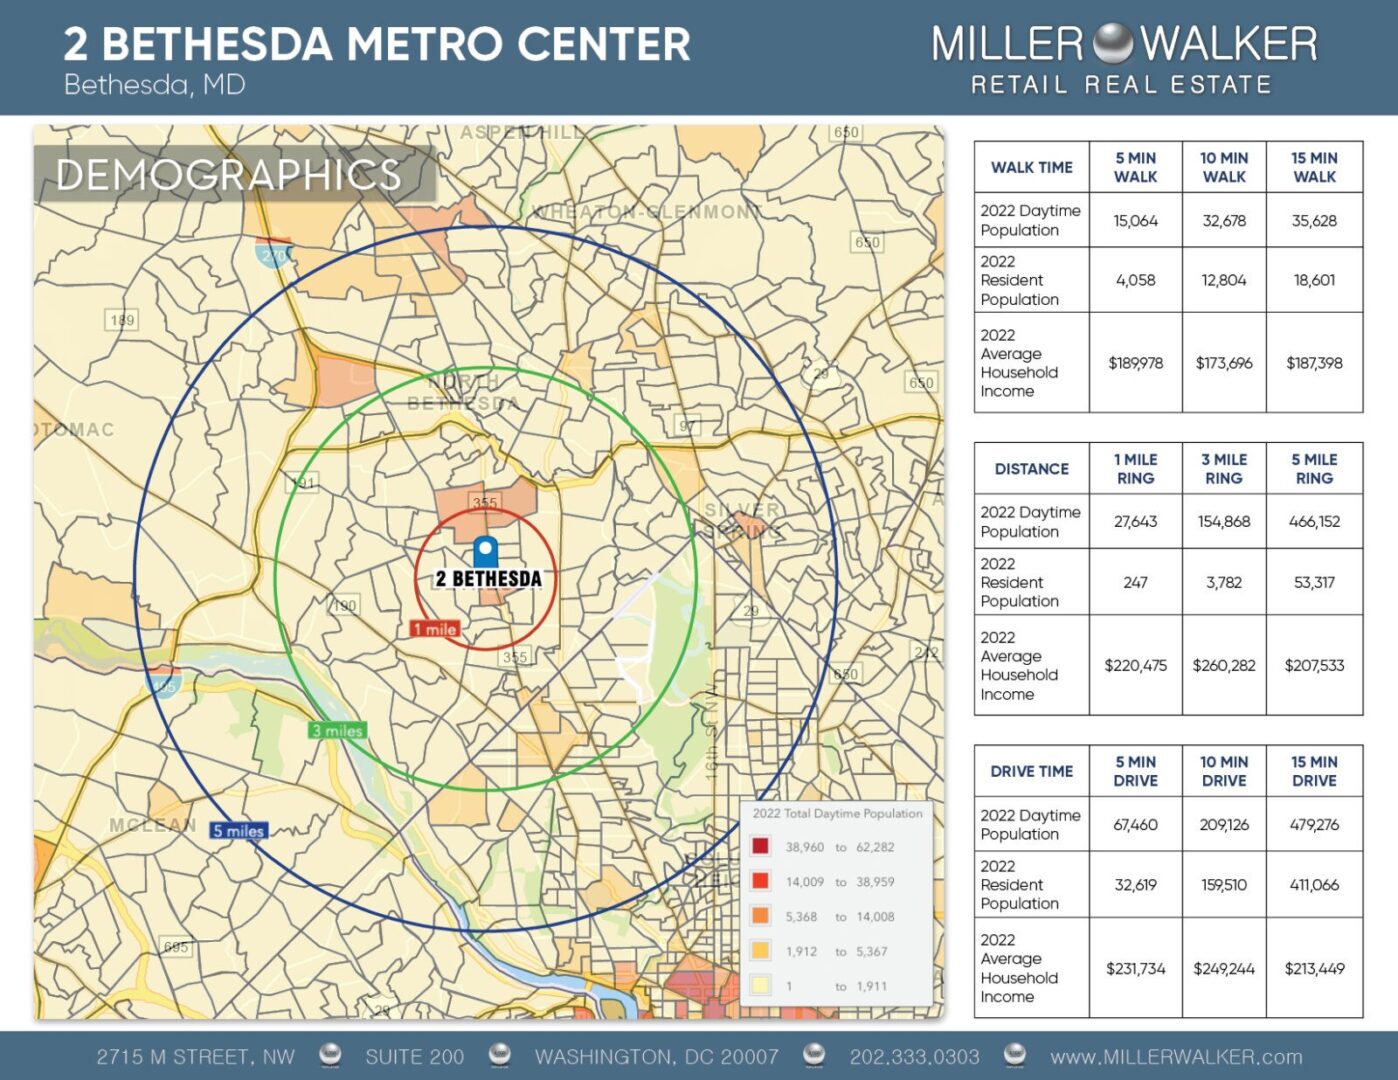 2 bethesda demographics population employment and average household income